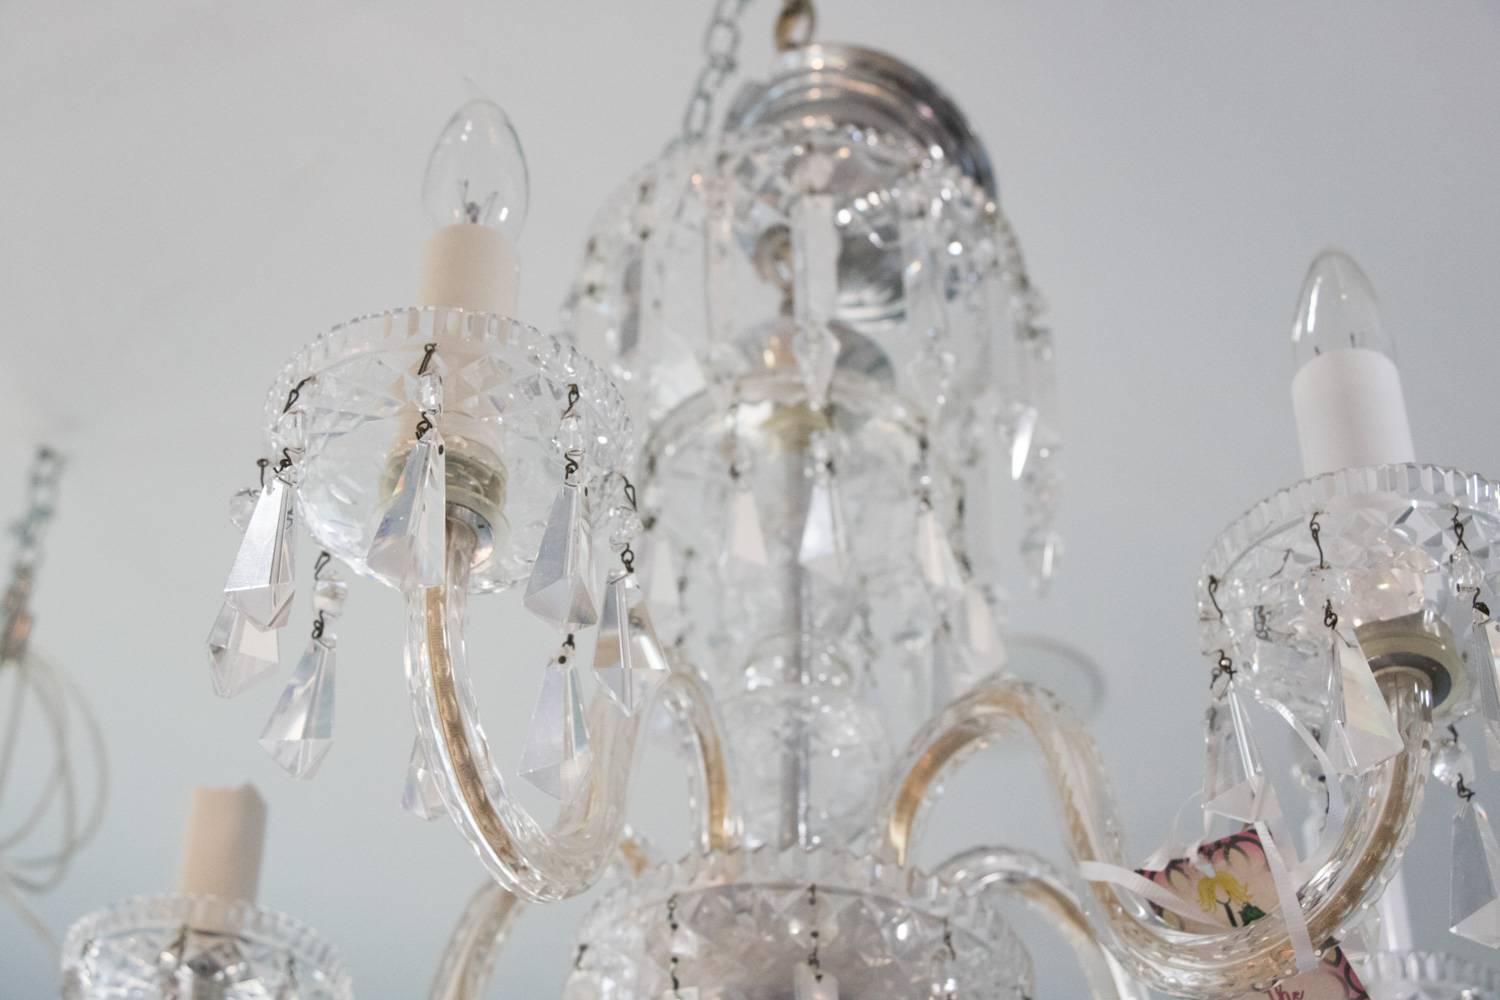 waterford chandelier 5 arm